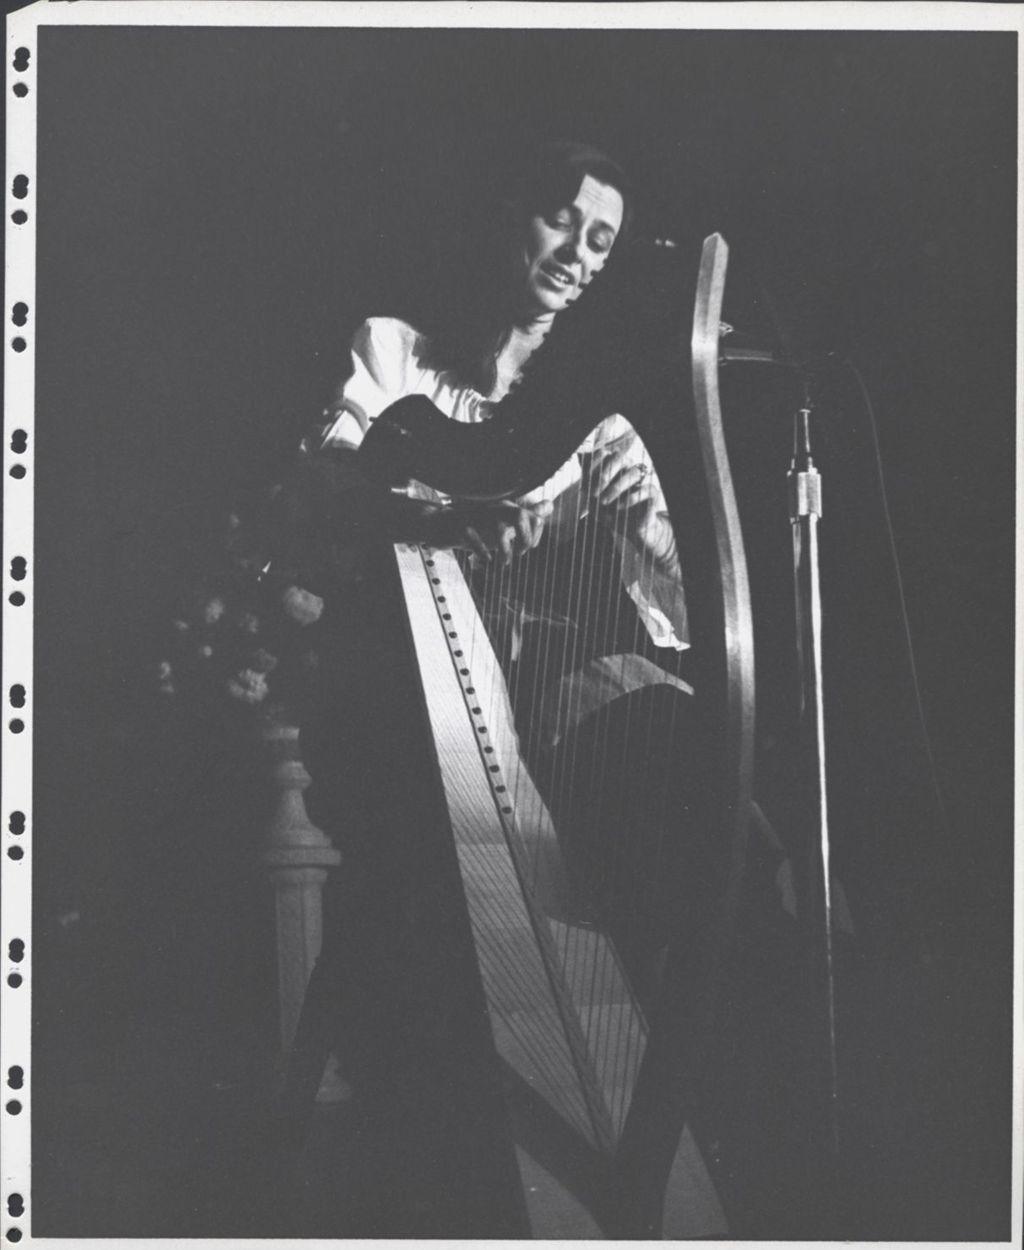 Miniature of Harpist playing behind a microphone